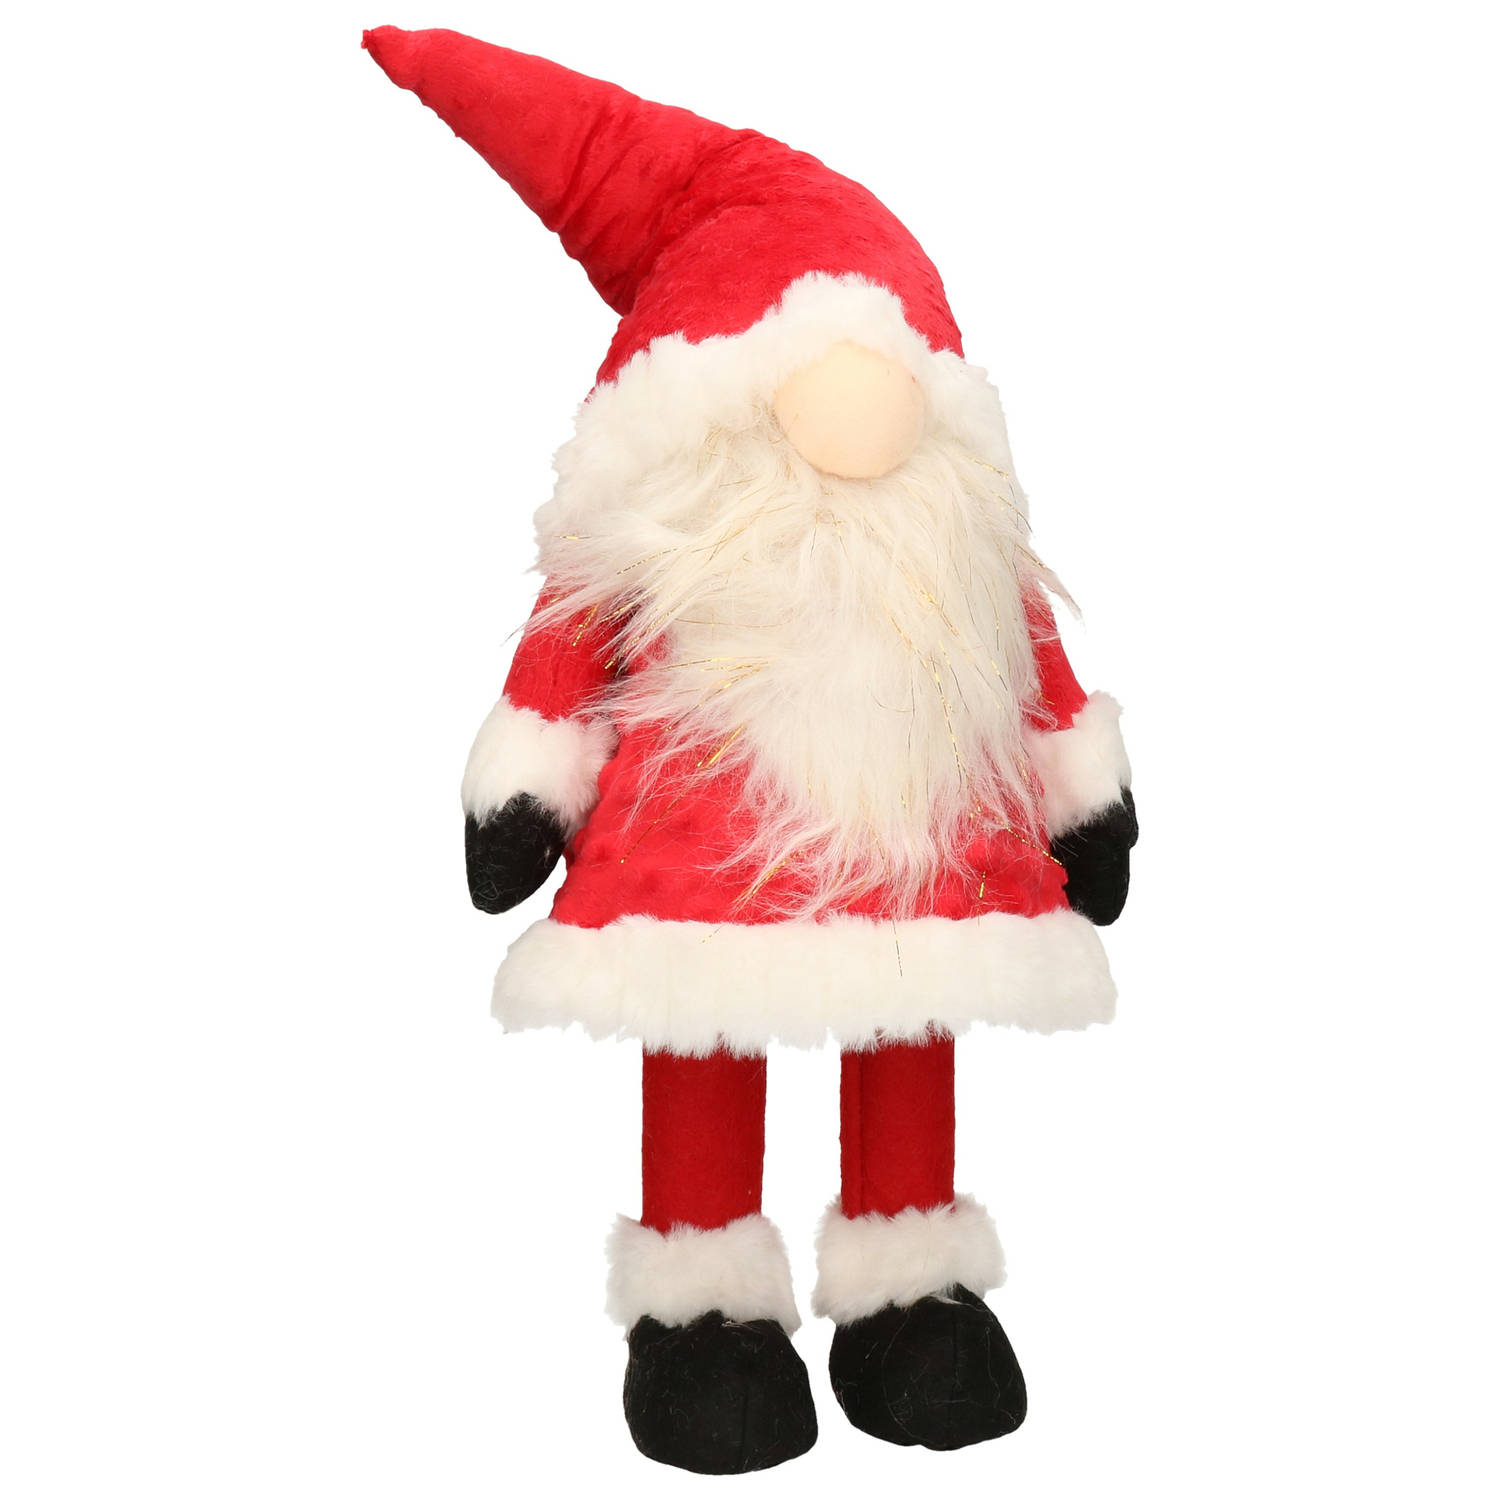 Puche knuffel gnome/kabouter kerstman pop - 42 cm - rood